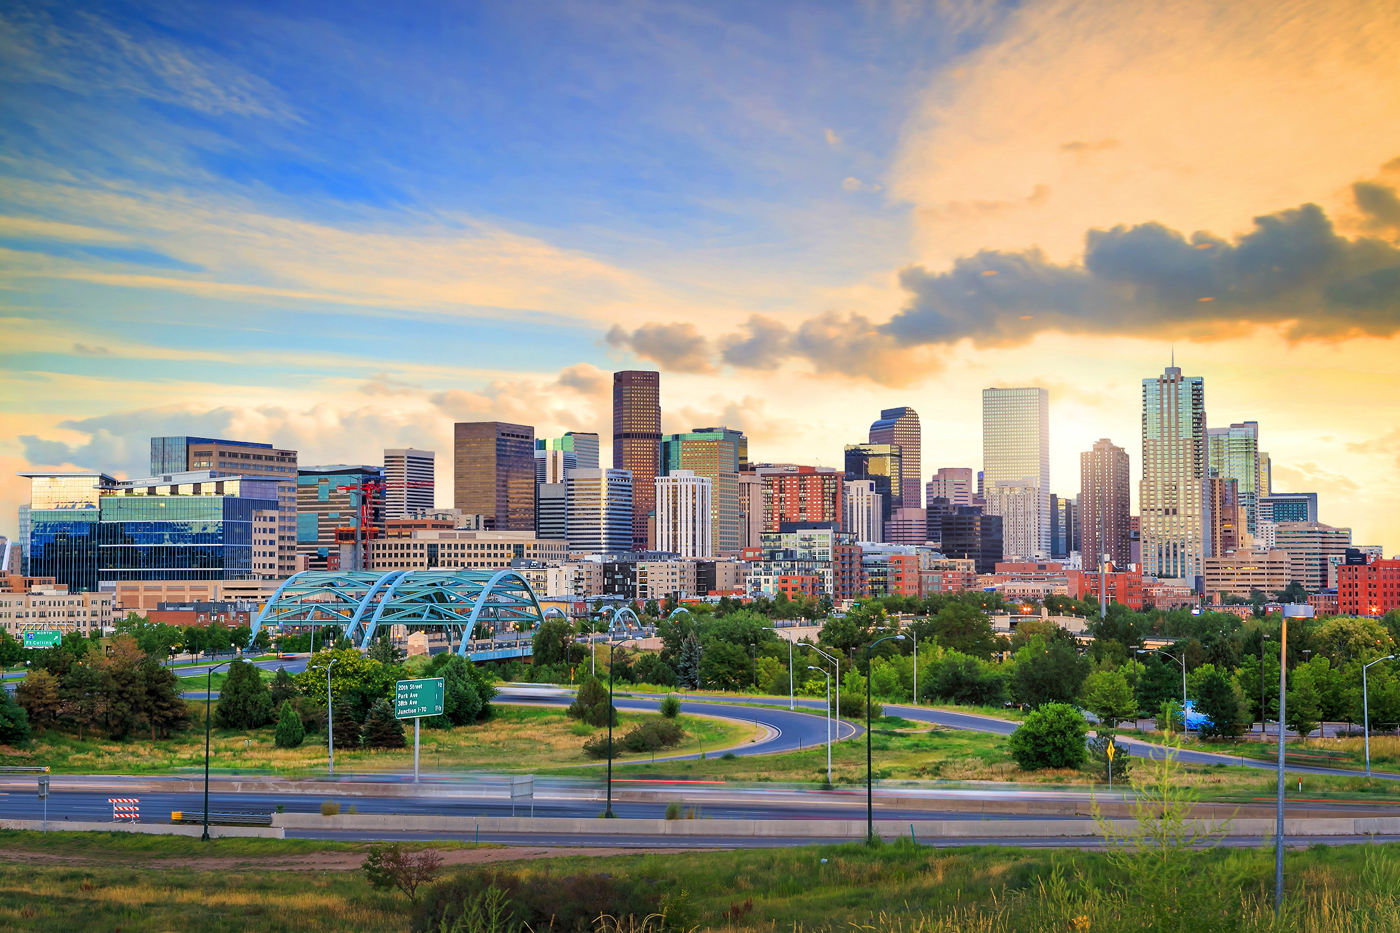 43 BEST THINGS TO DO IN DENVER THAT YOU'LL LOVE